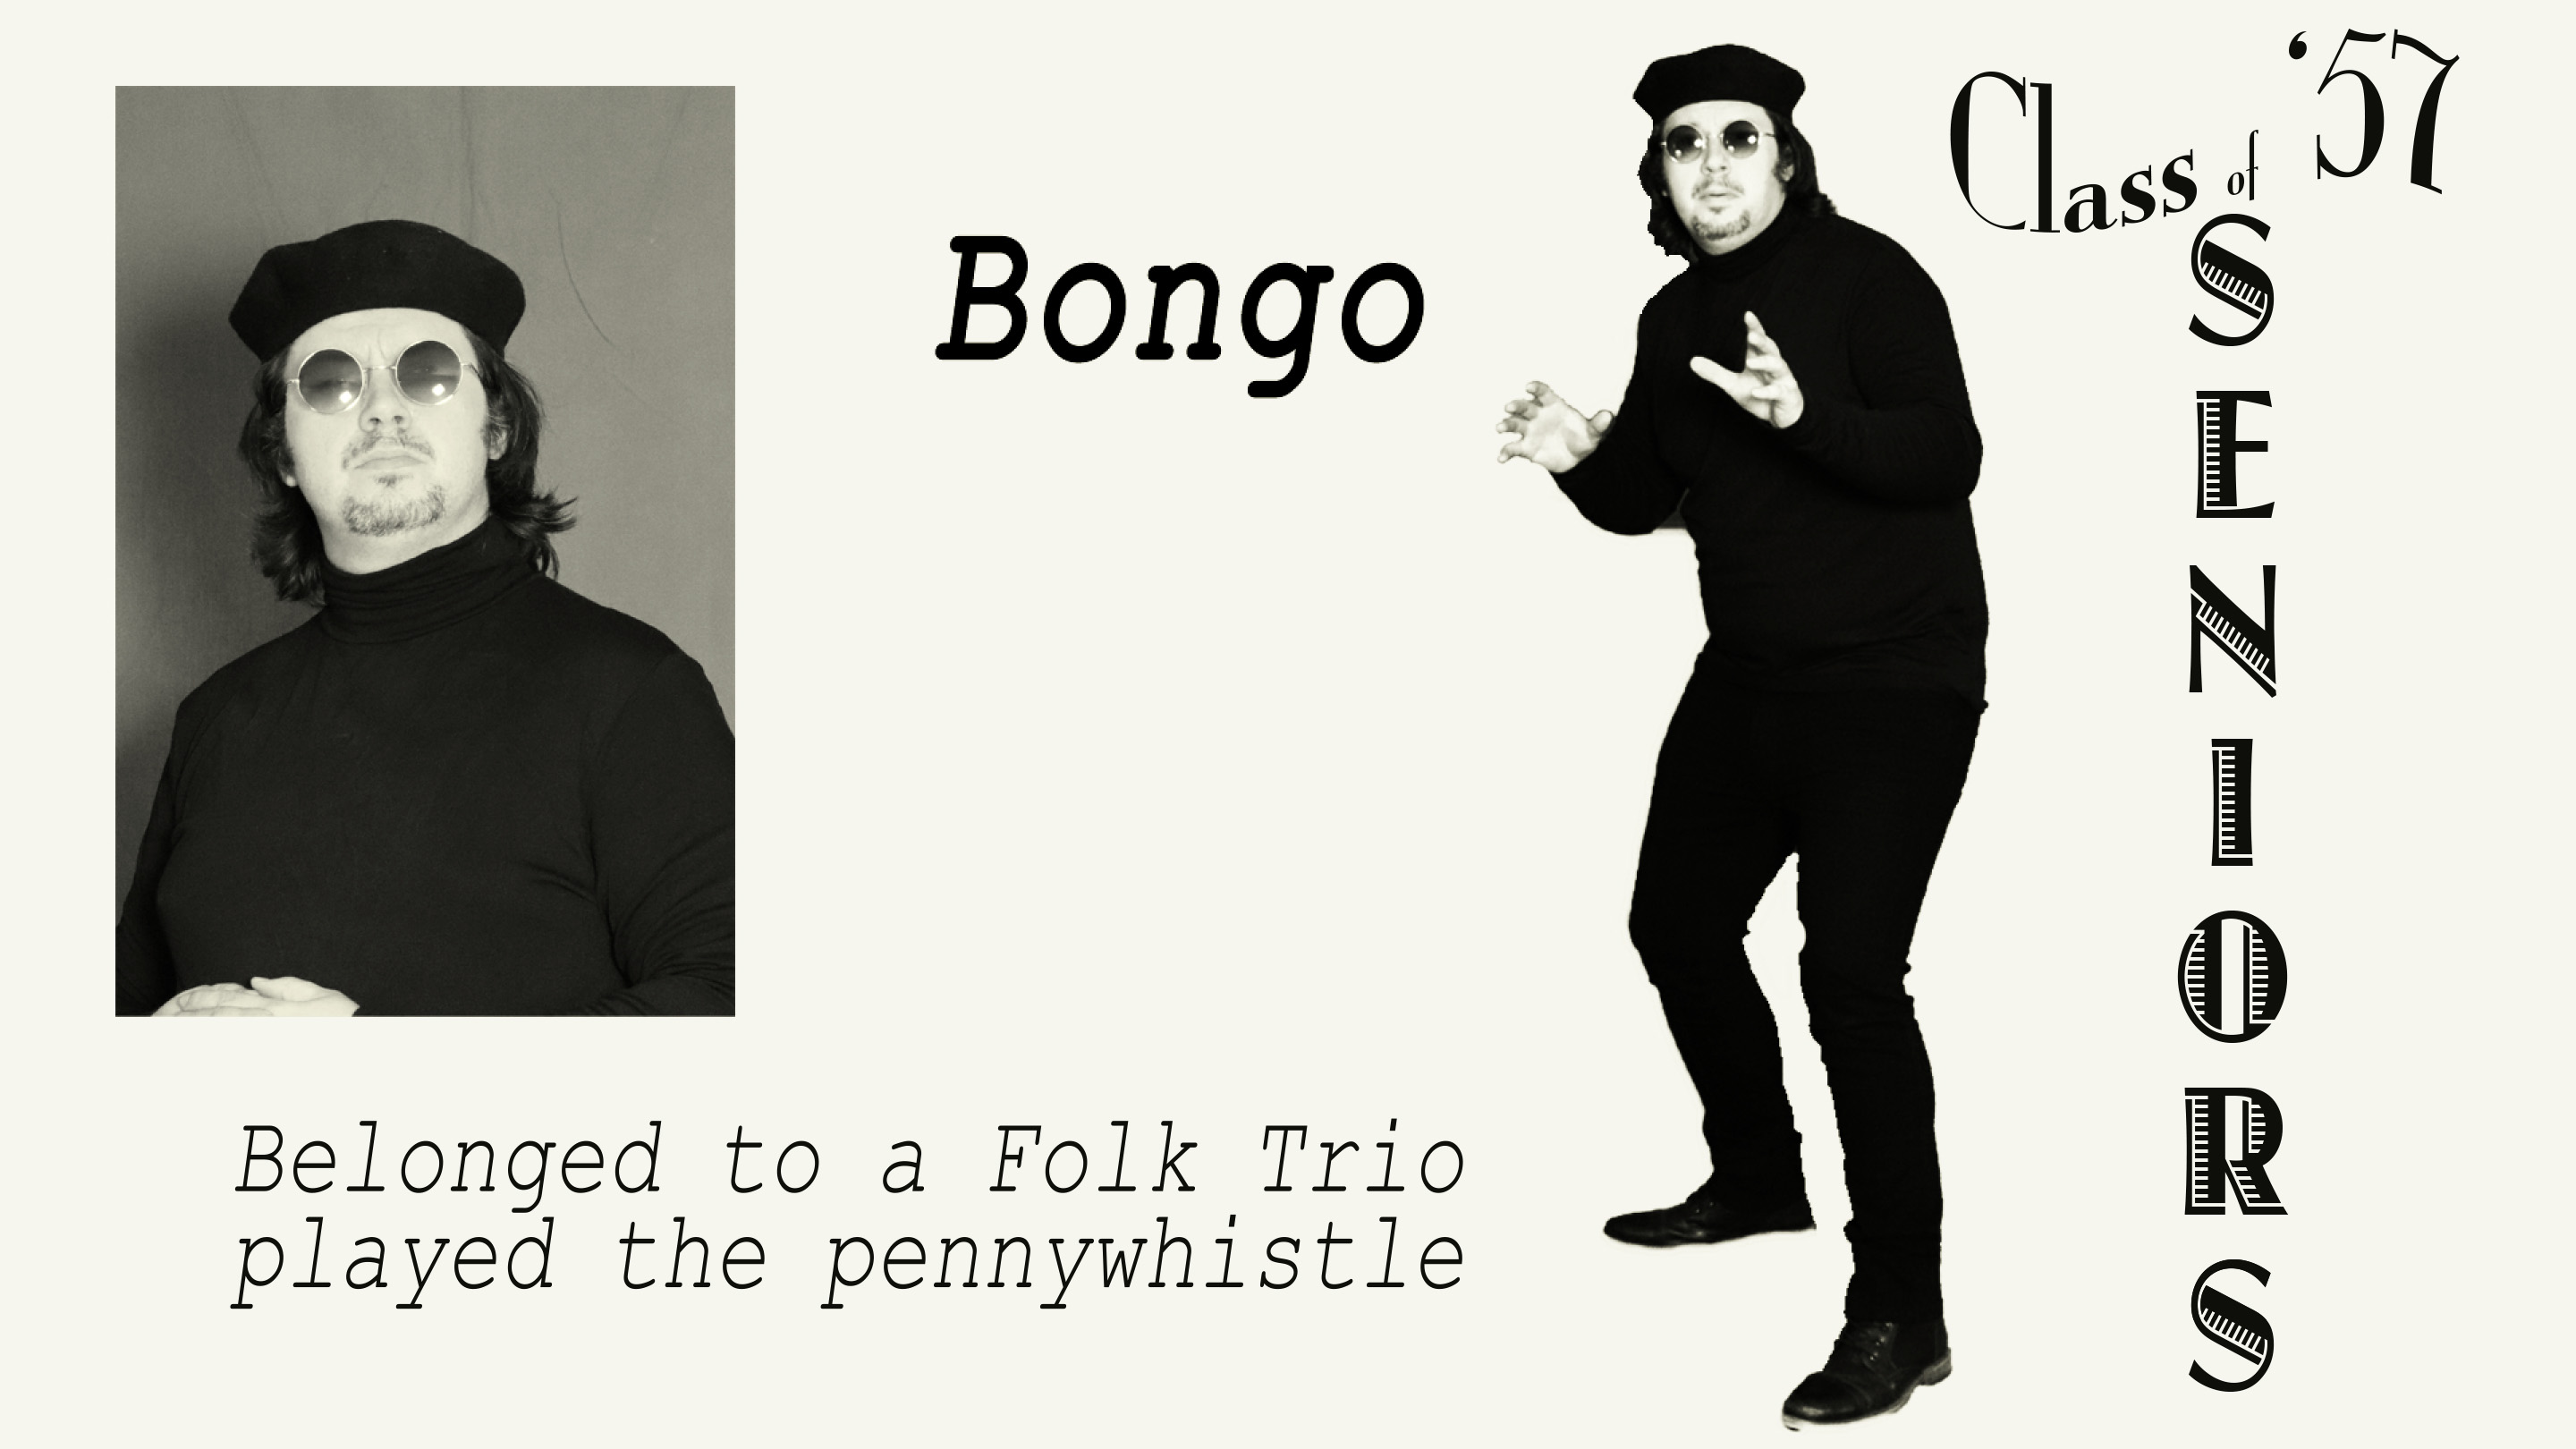 All about Bongo